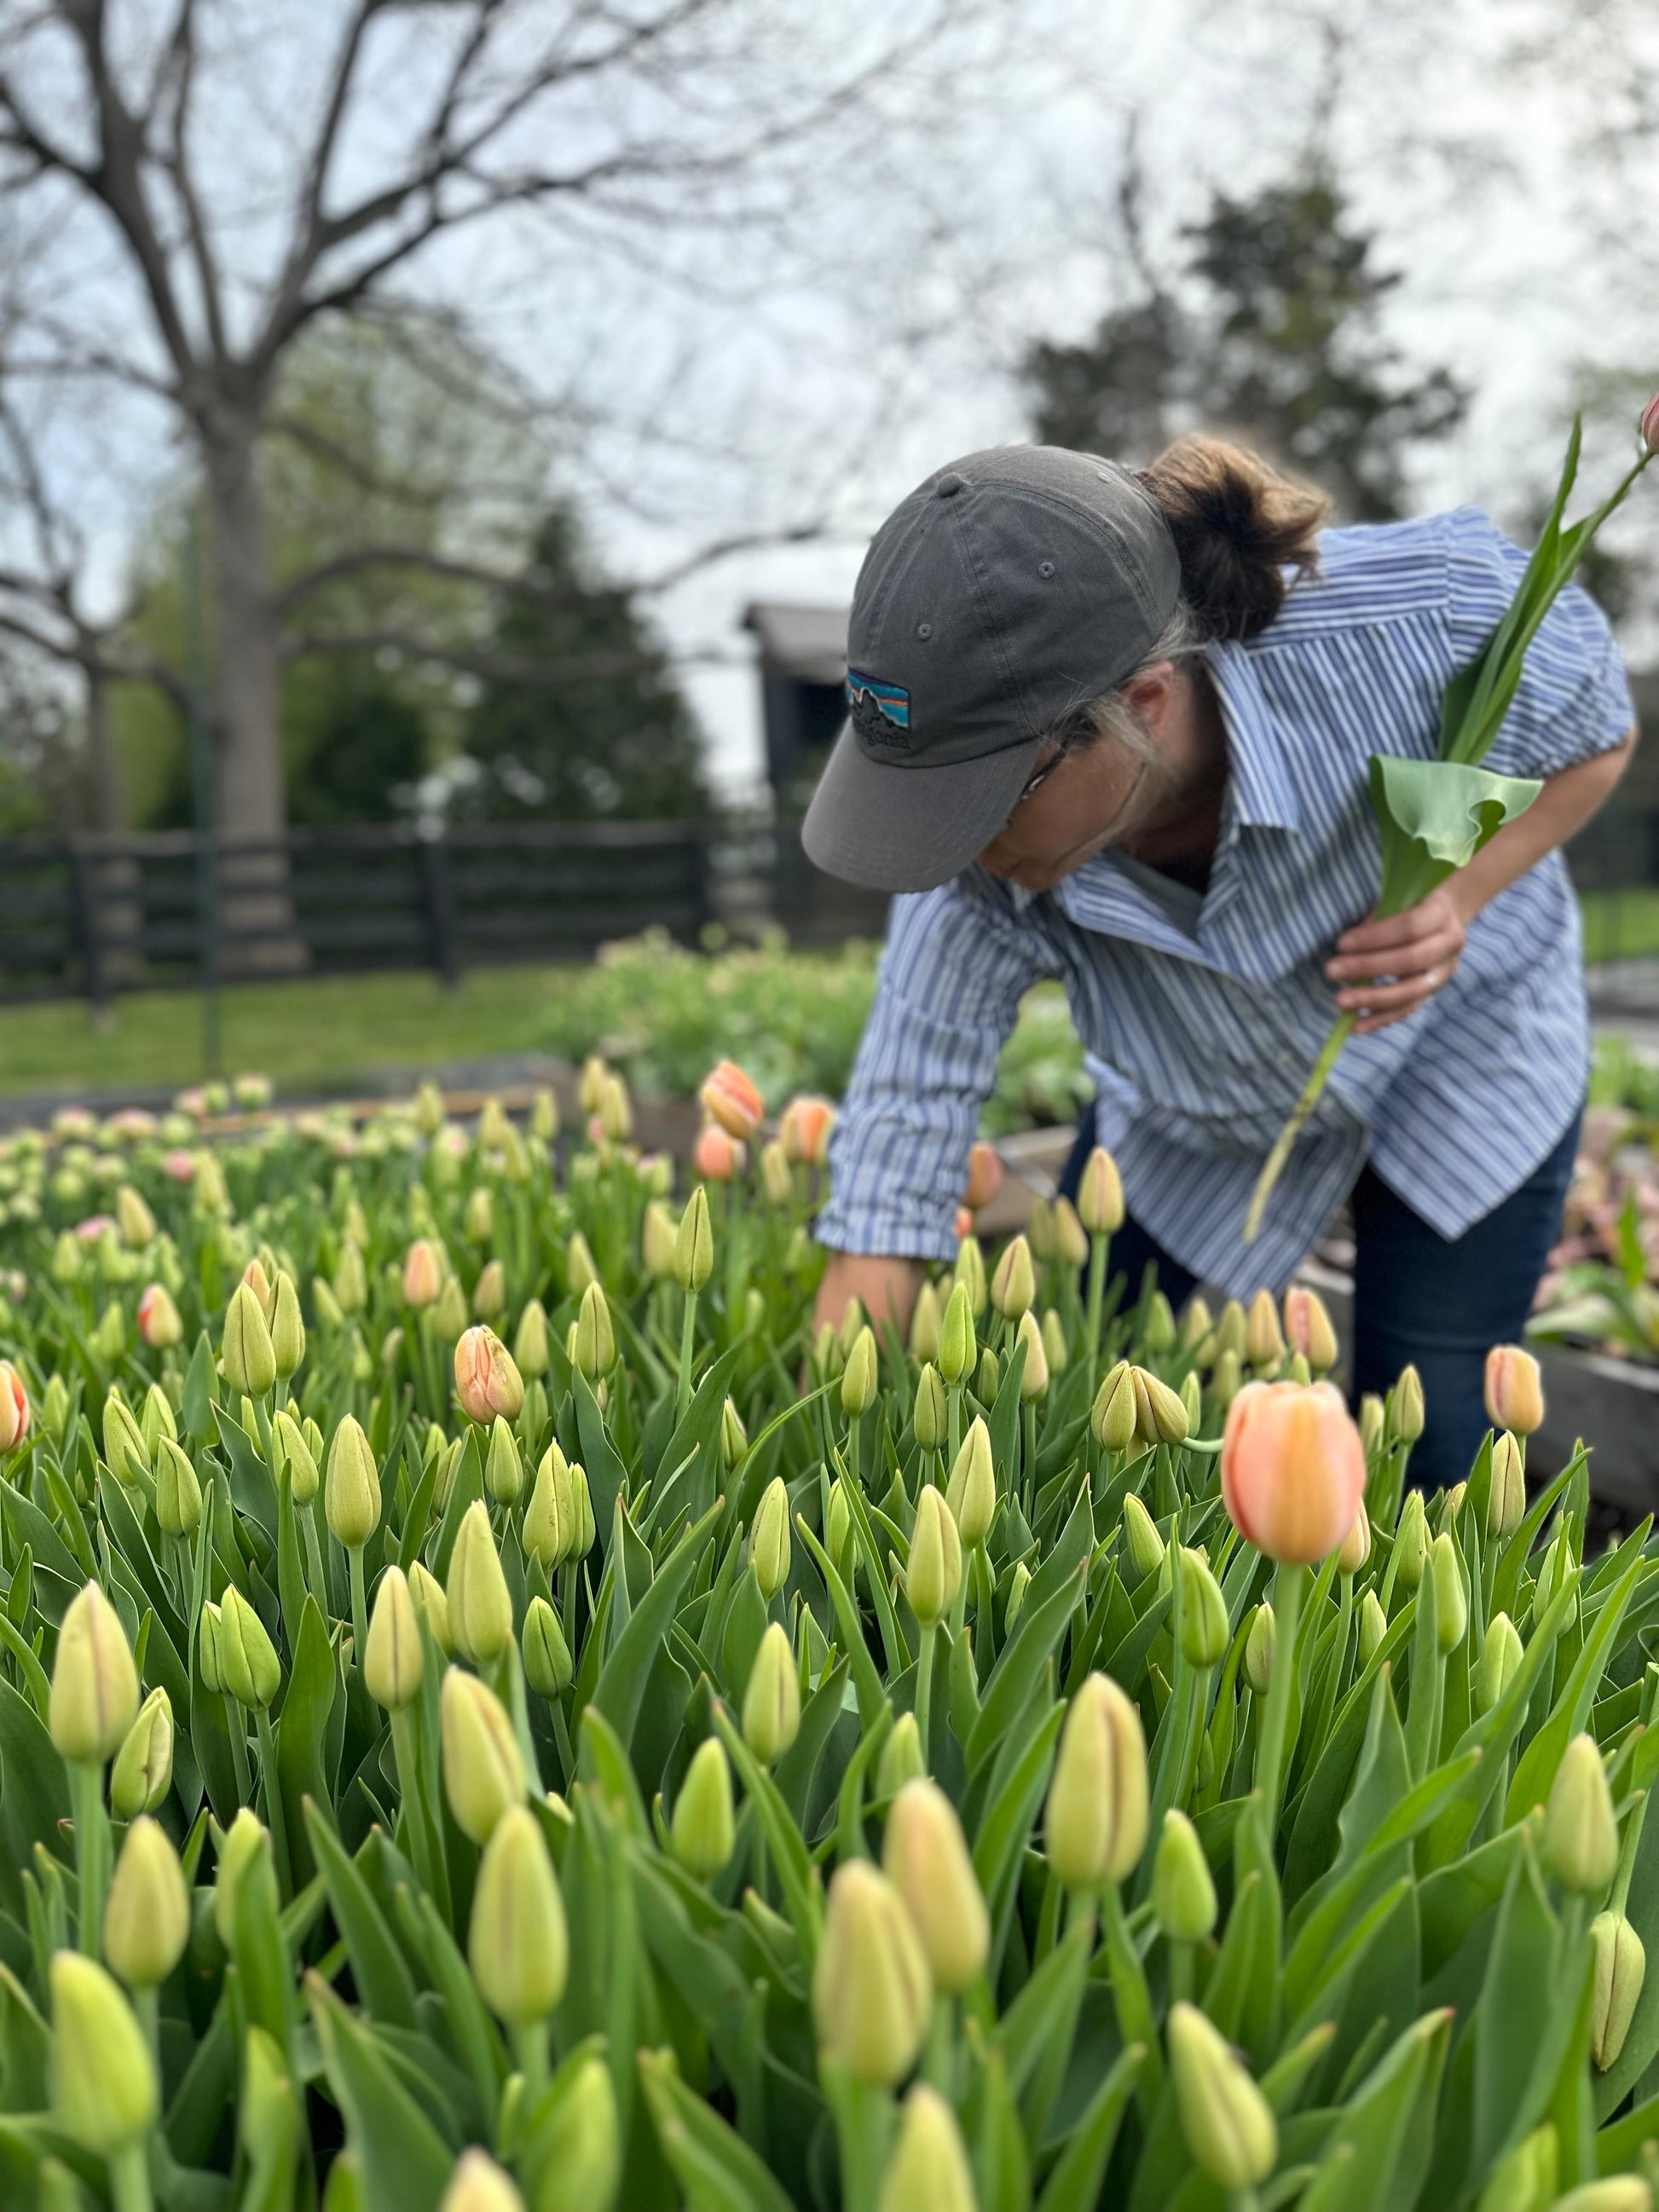 Harvesting tulips fresh from the fields for Loudoun County subscriptions